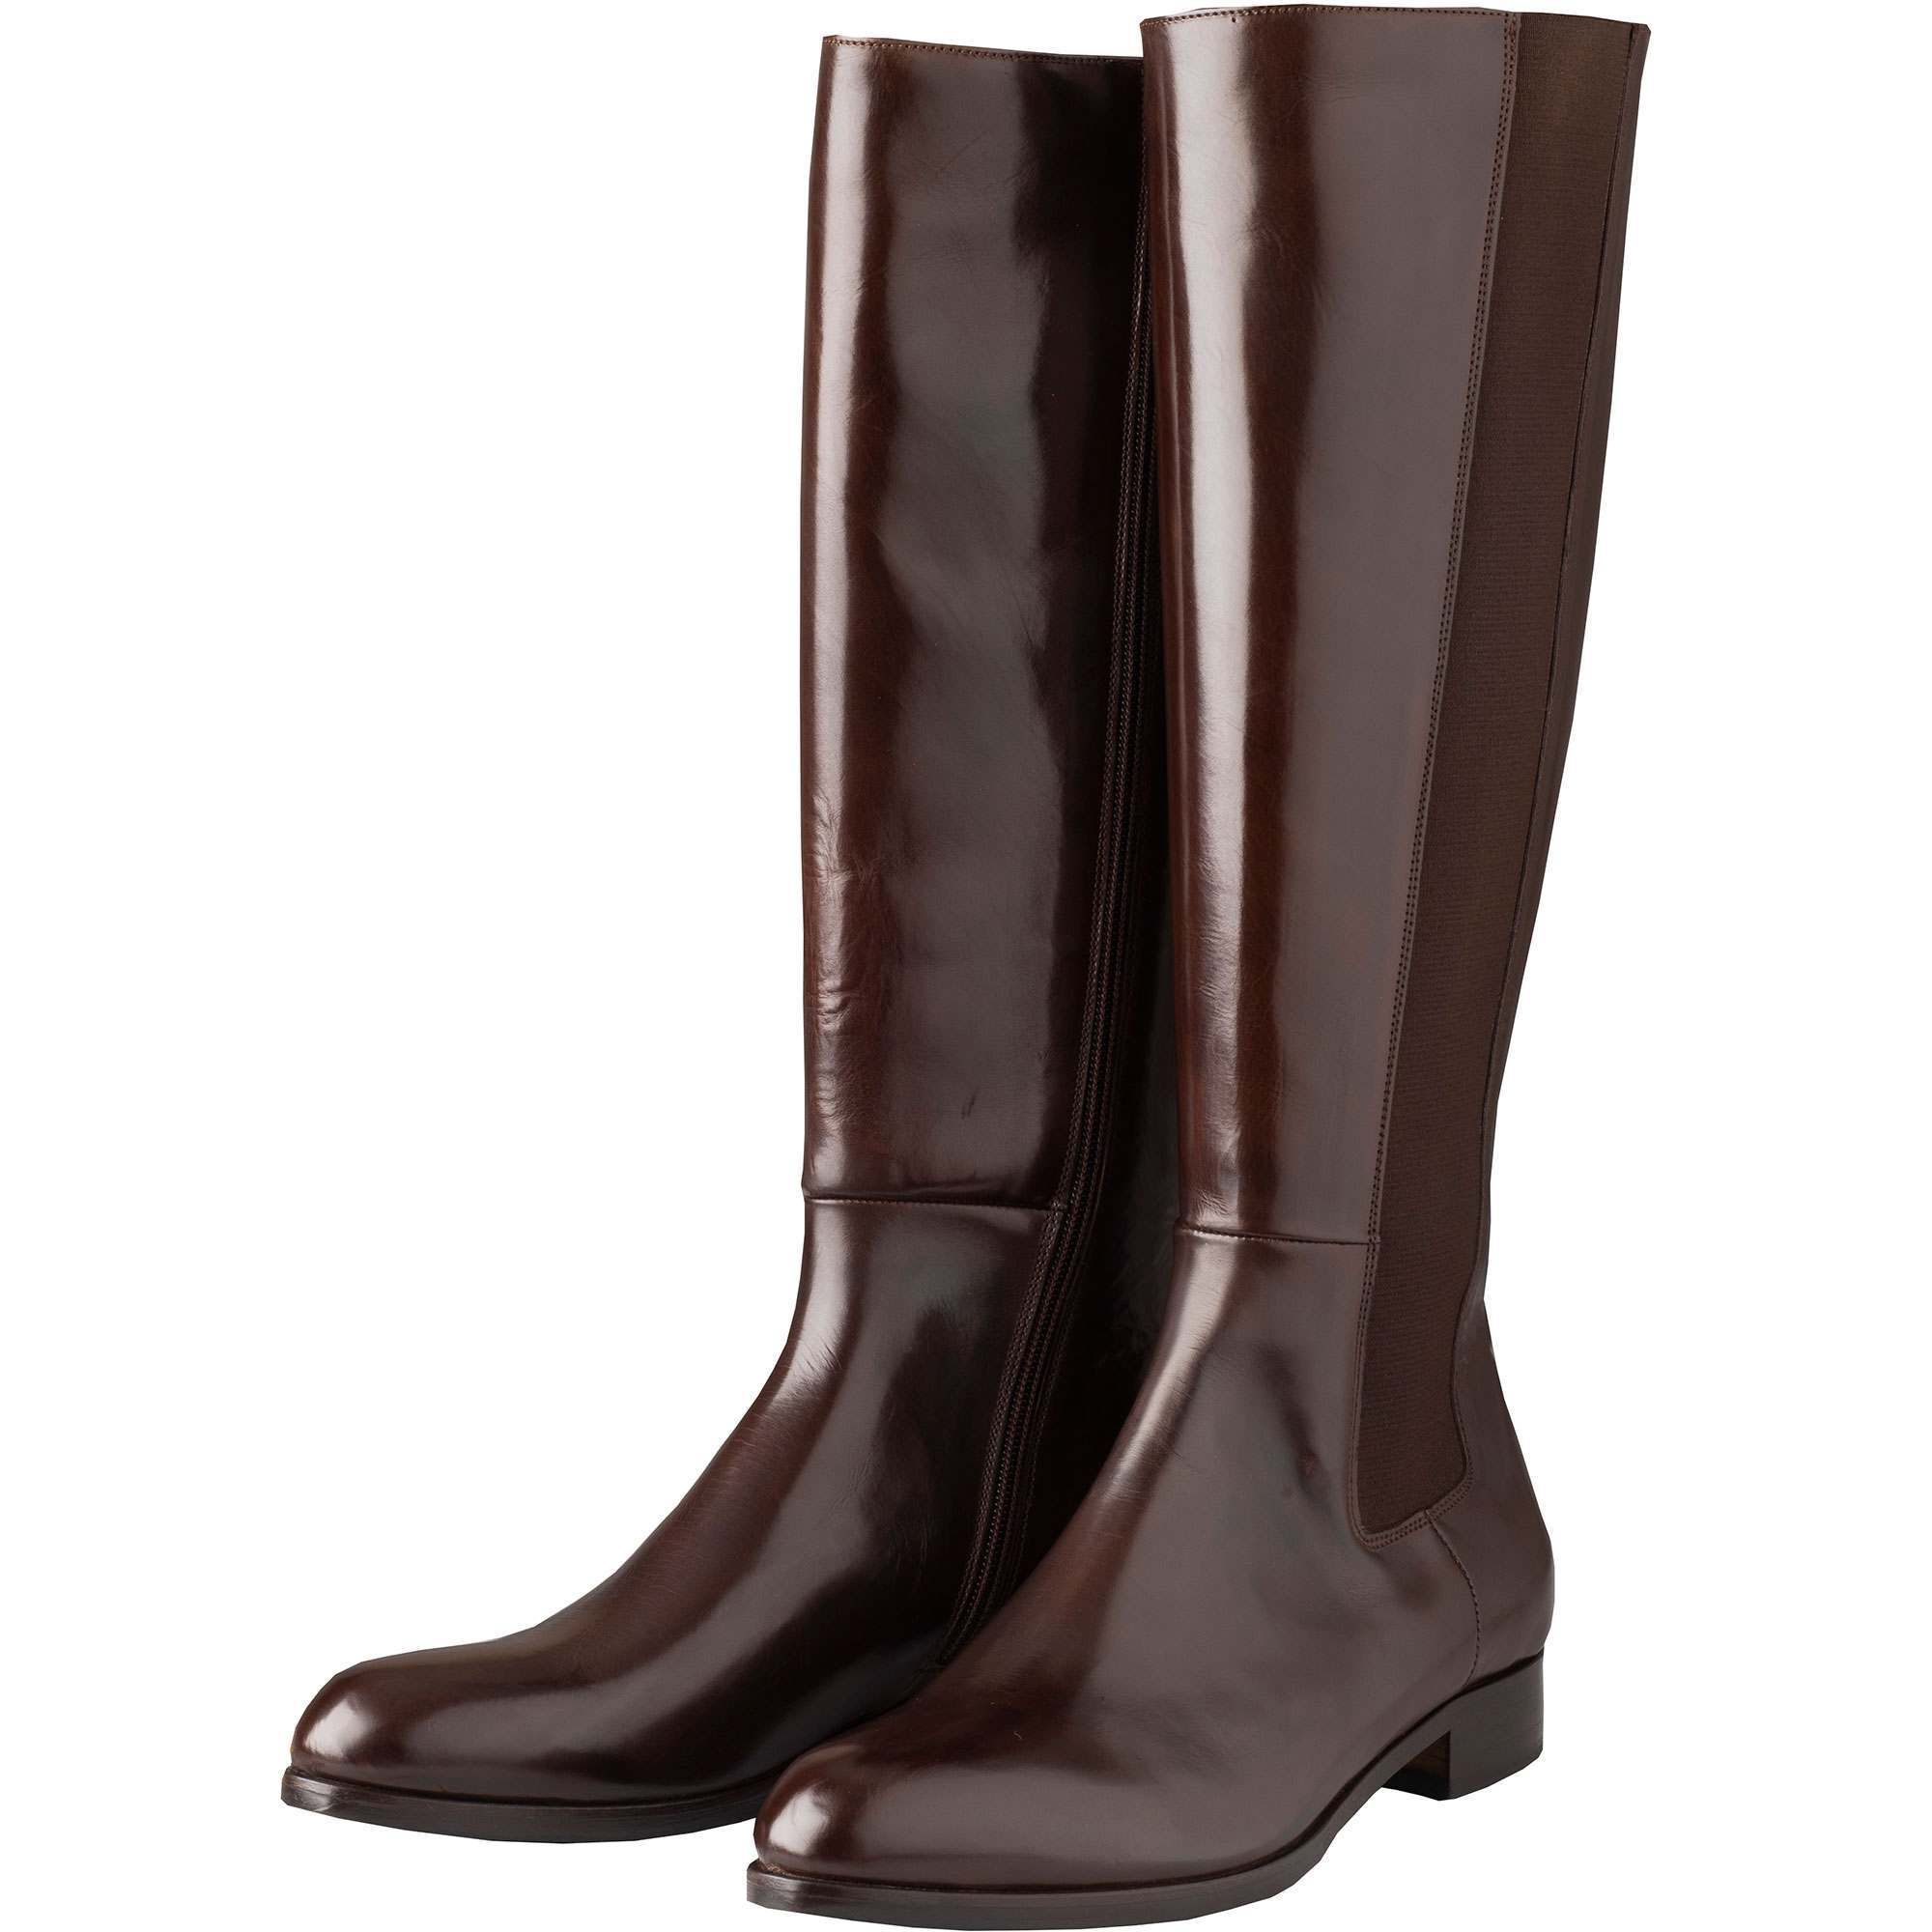 Ladies chocolate brown boots